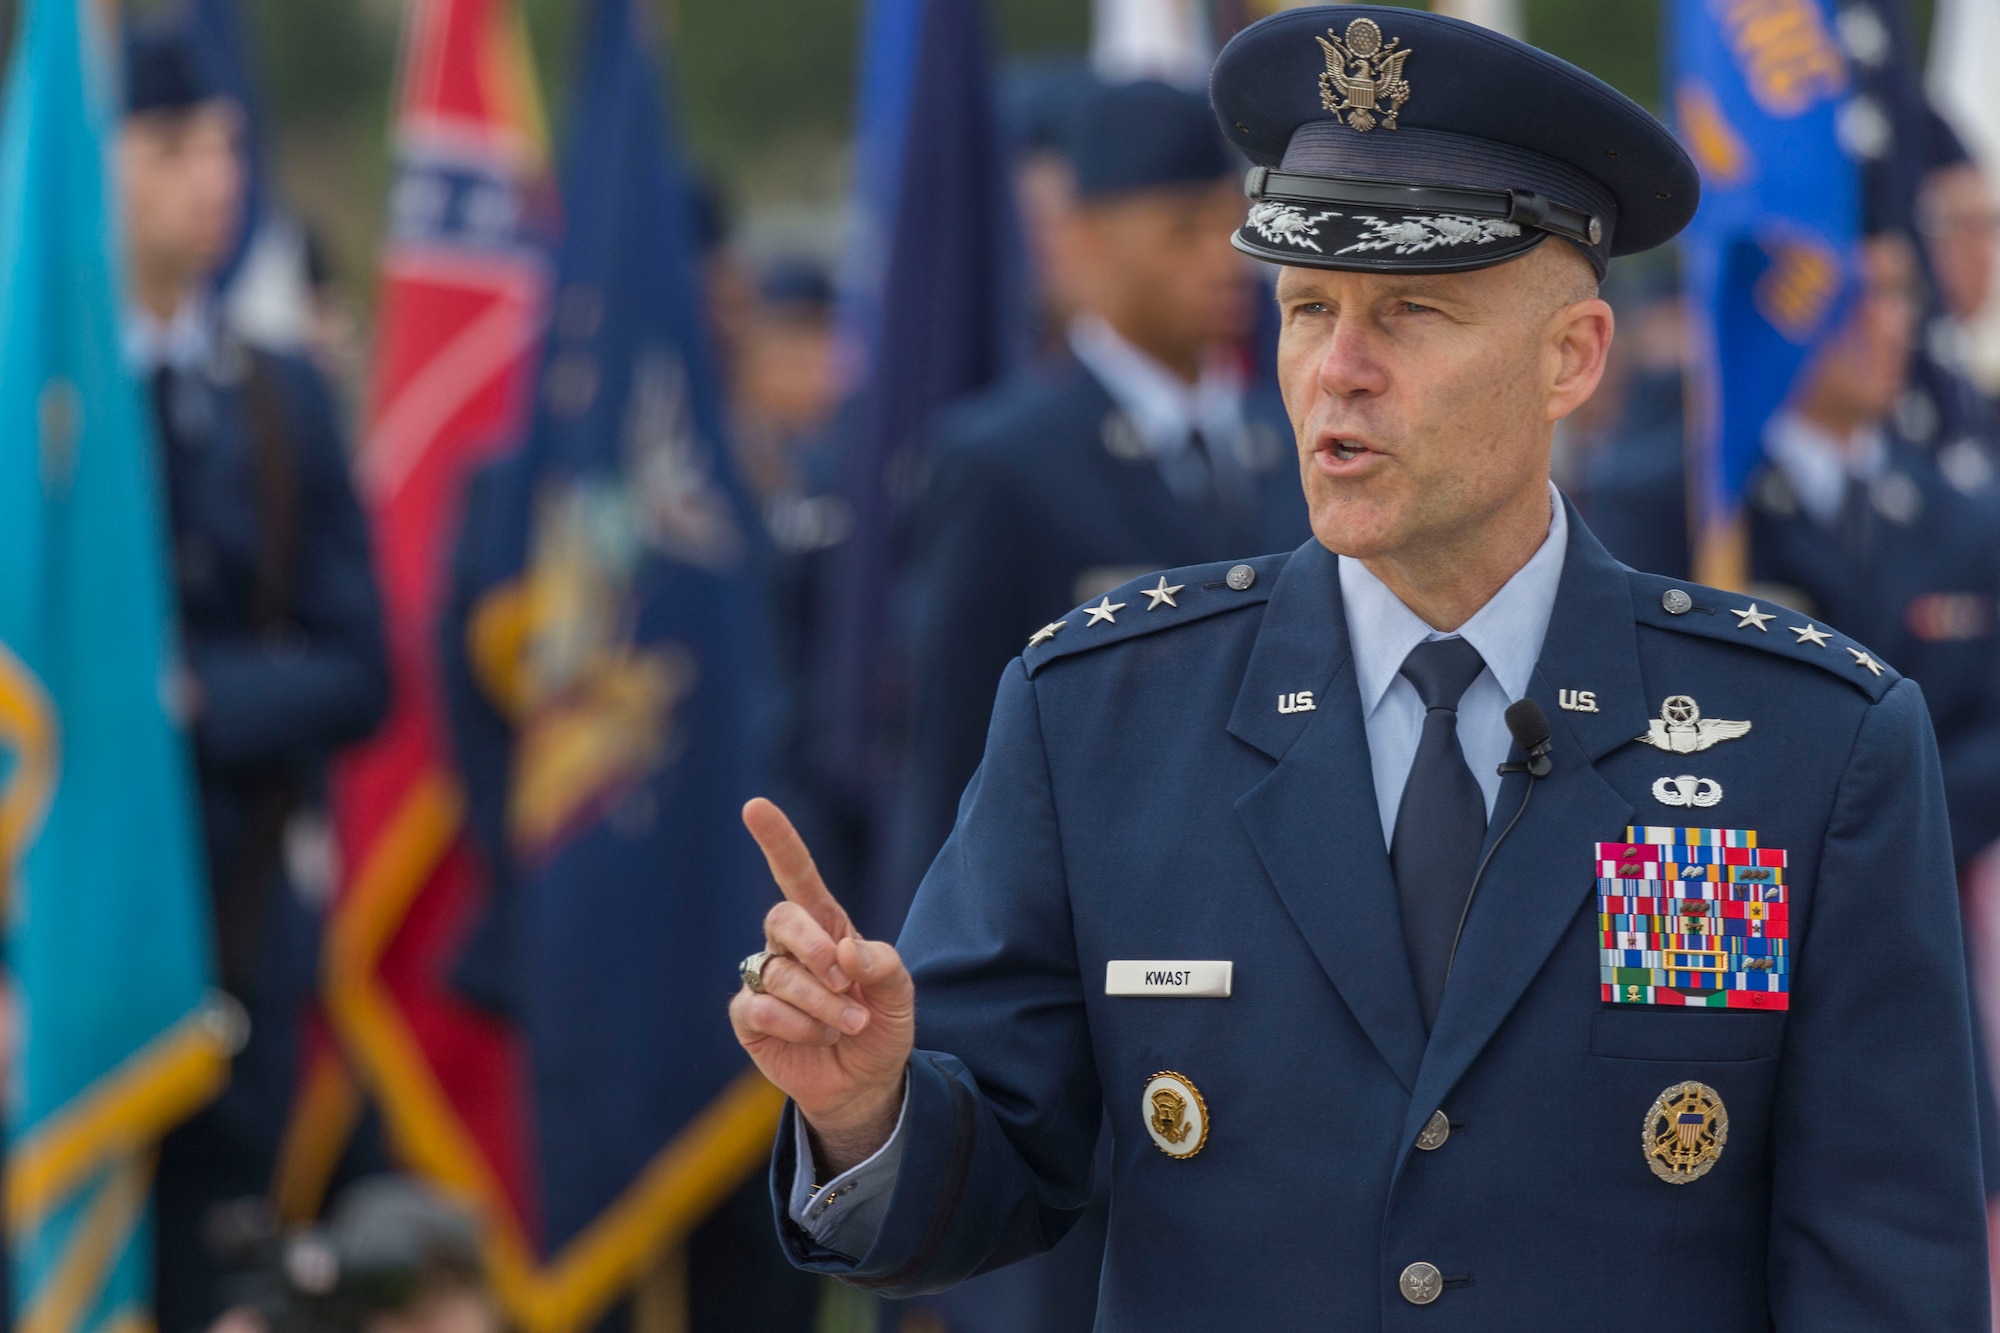 Lt. Gen. Steven L. Kwast, Commander of the Air Education and Training Command address the crowd at Joint Base San Antonio-Lackland, Texas during a basic military training graduation ceremony April 20, 2018. The ceremony also acknowledged the beginning of “Fiesta San Antonio,” the city’s annual festival held to honor the memory of the battles of the Alamo and San Jacinto. (U.S. Air Force photo by Ismael Ortega / Released)